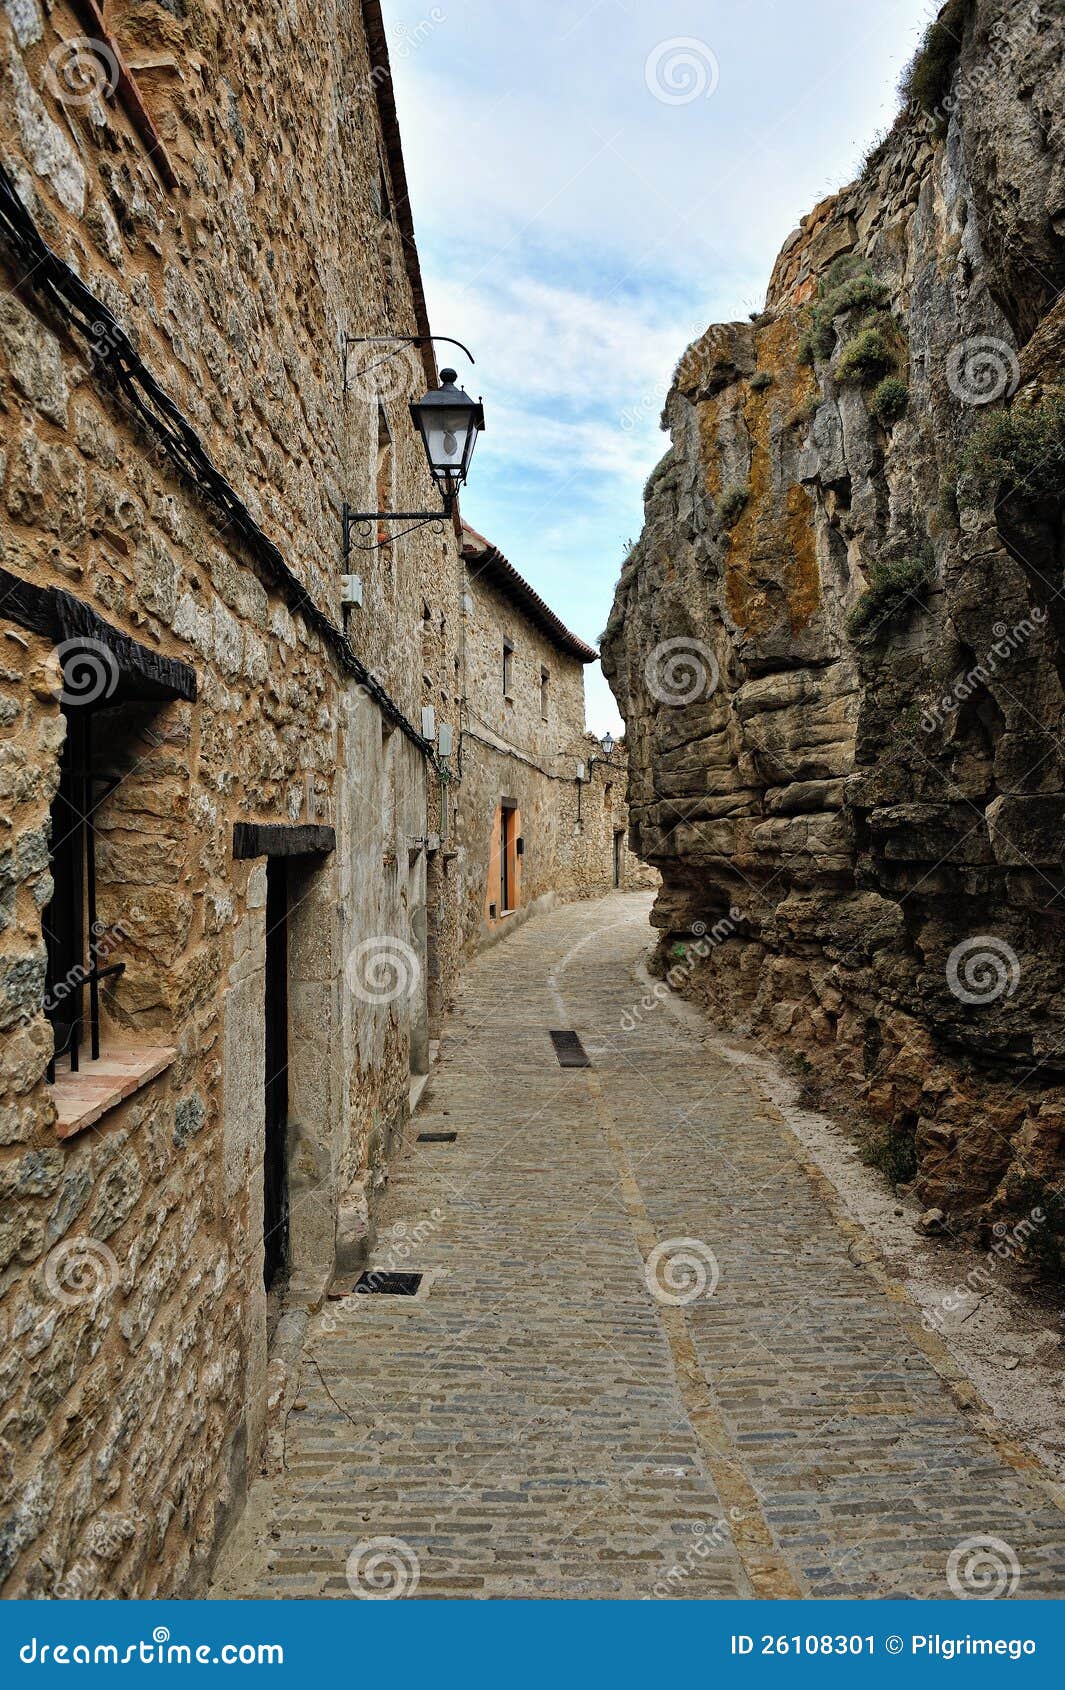 Landscape with old spanish town Ares. Streets of the small town.